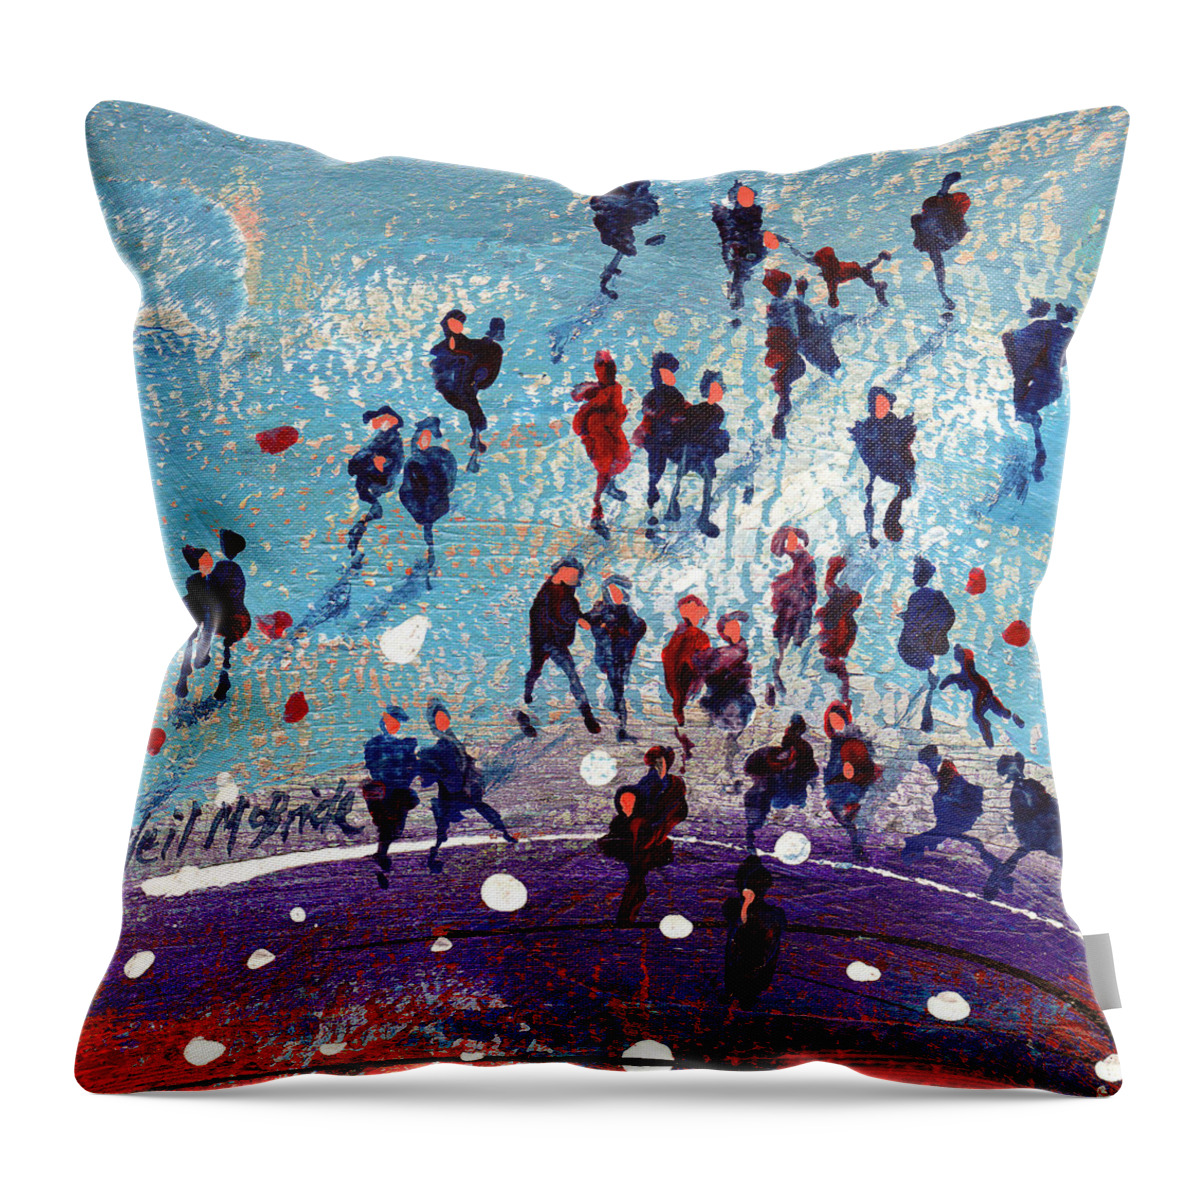 Promenade Throw Pillow featuring the painting Promenade View by Neil McBride